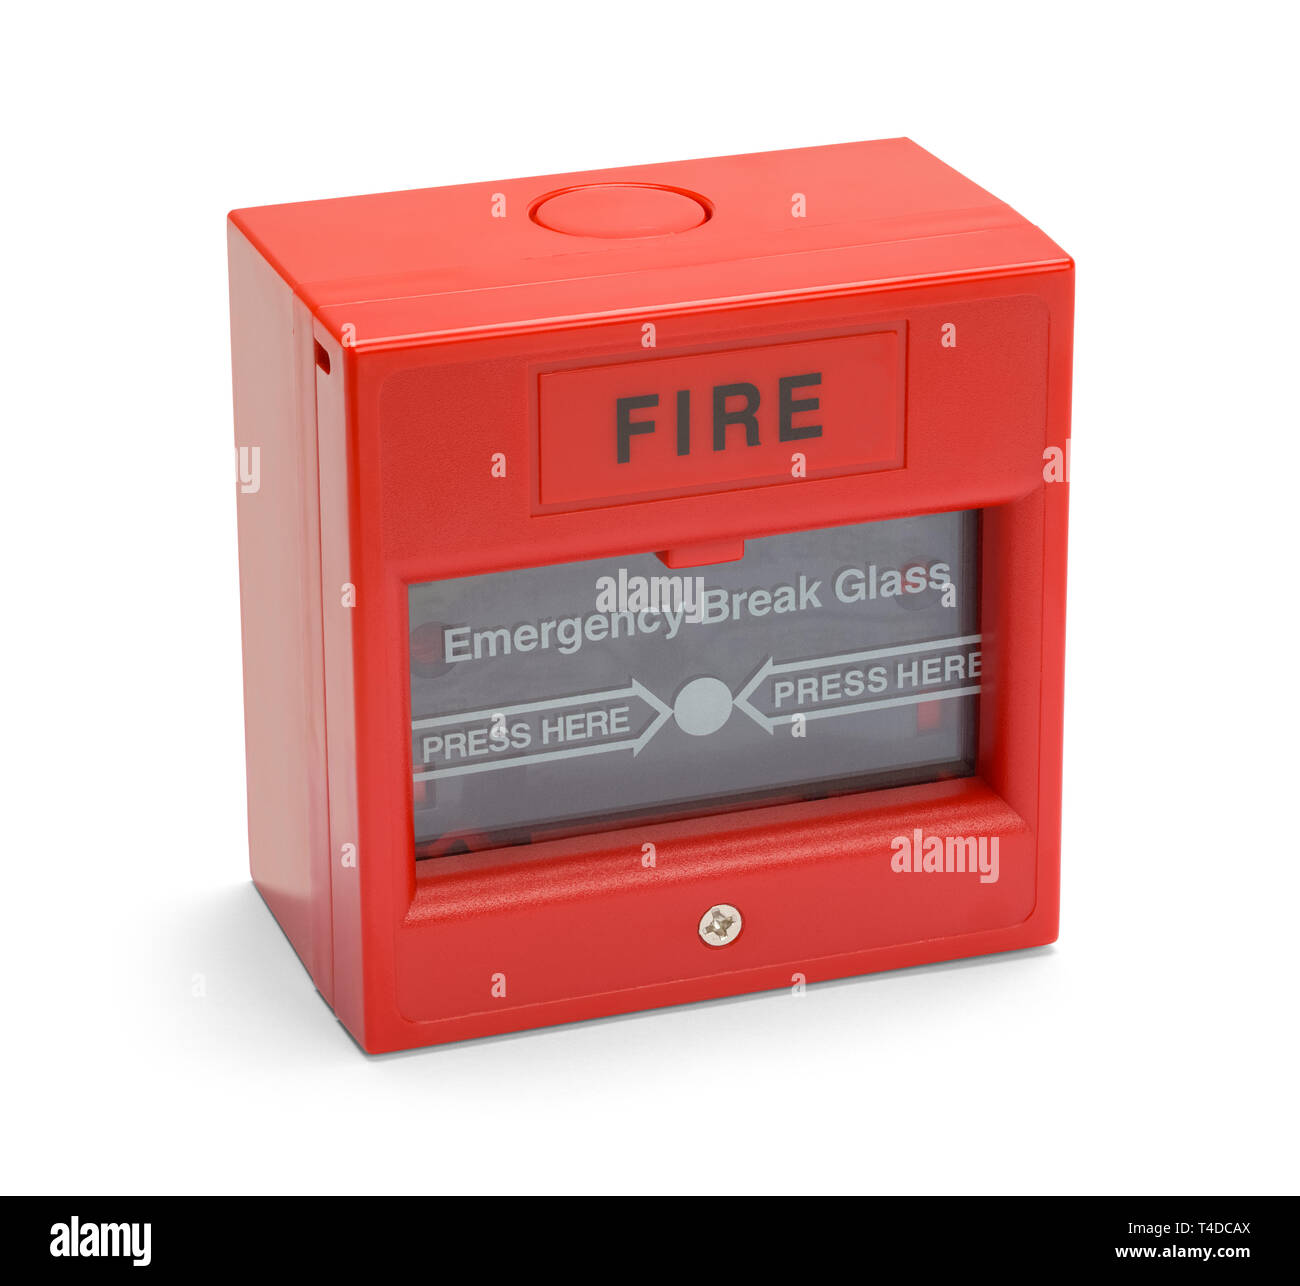 Red Fire Alarm Bod Isolated on a White Background. Stock Photo